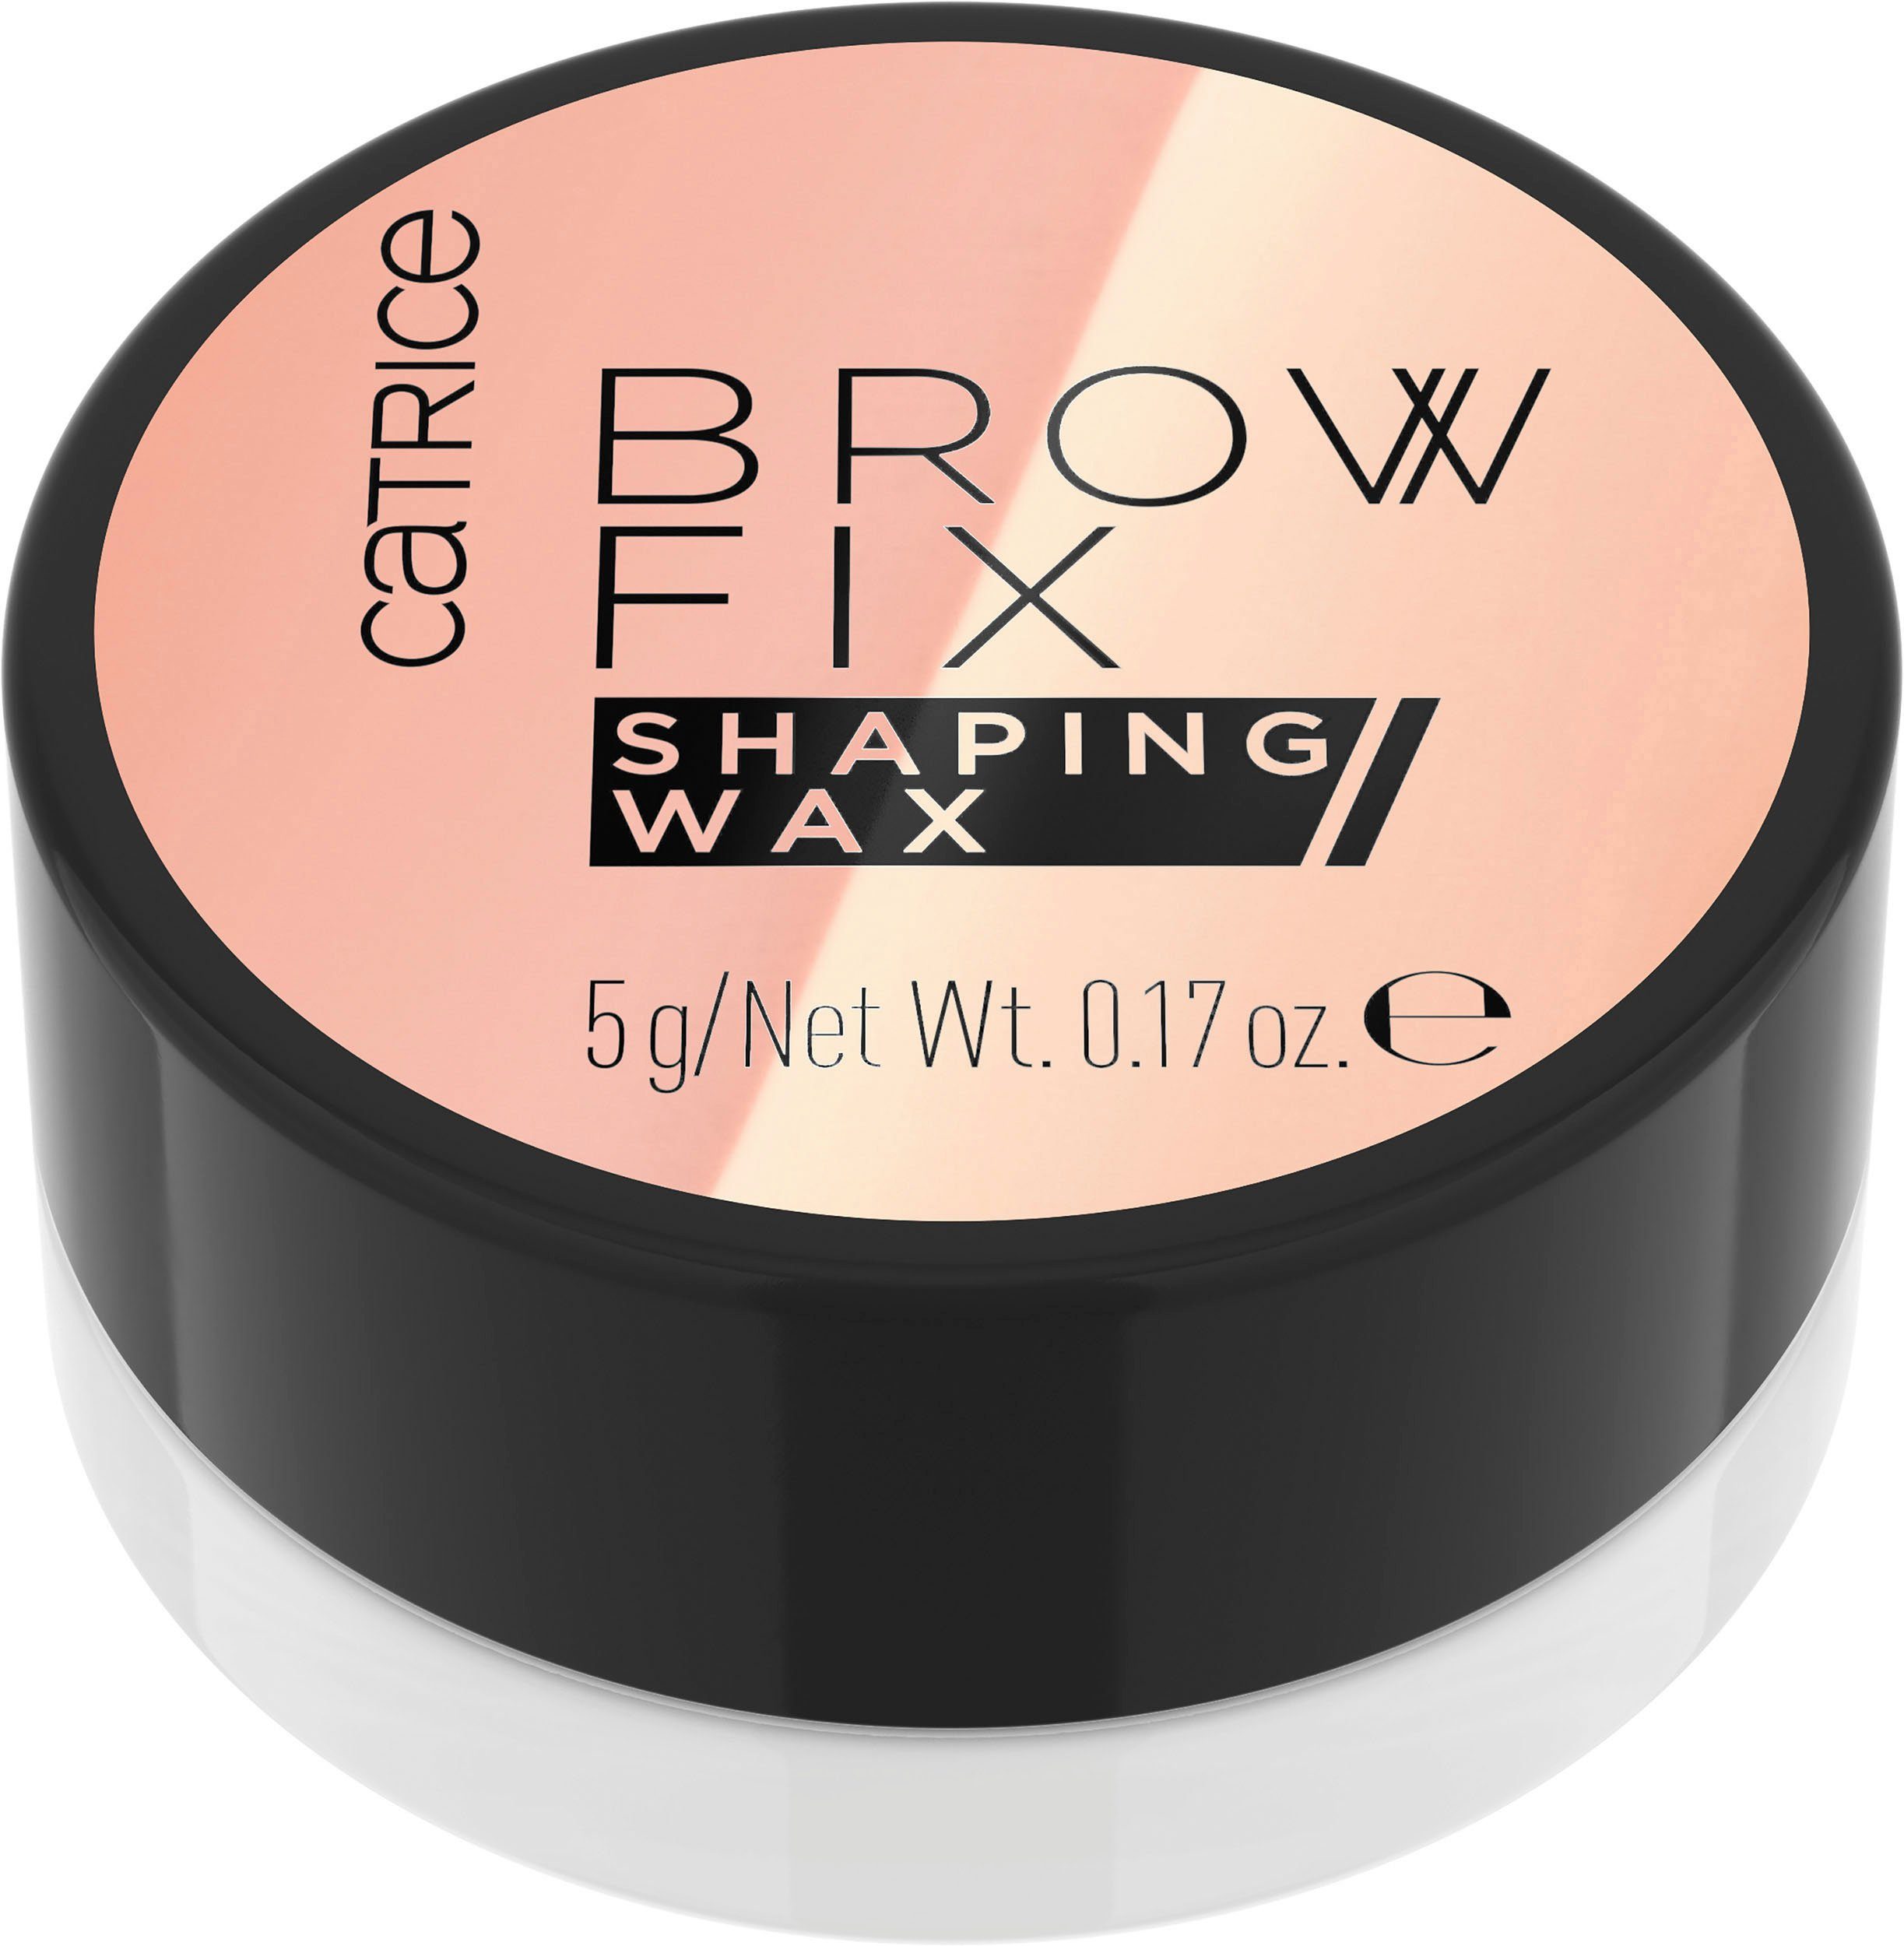 Catrice Augenbrauen-Gel Catrice Brow Fix Shaping Wax 3-tlg. 010